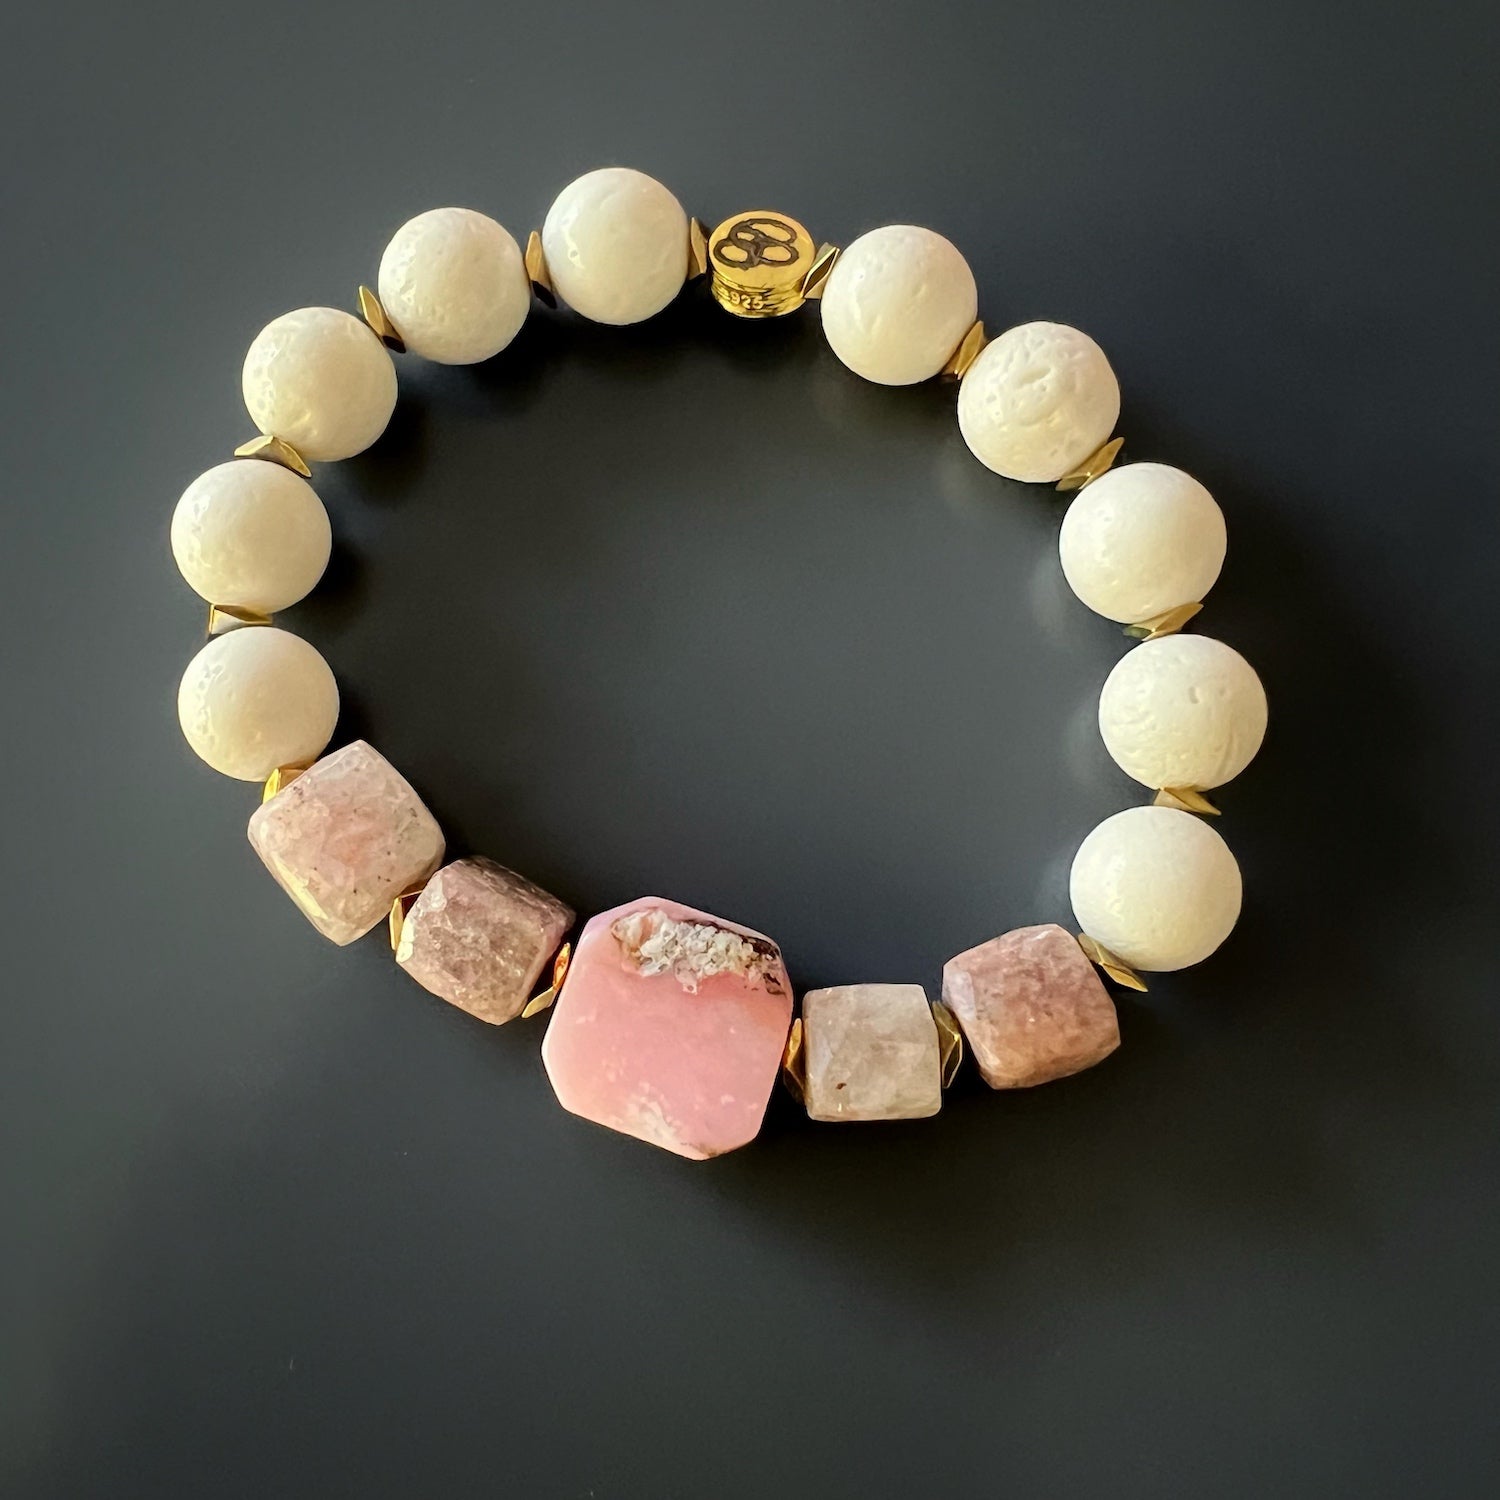 The Pink Quartz Balance Bracelet is a meaningful accessory, handmade with care to bring you balance and healing energies.